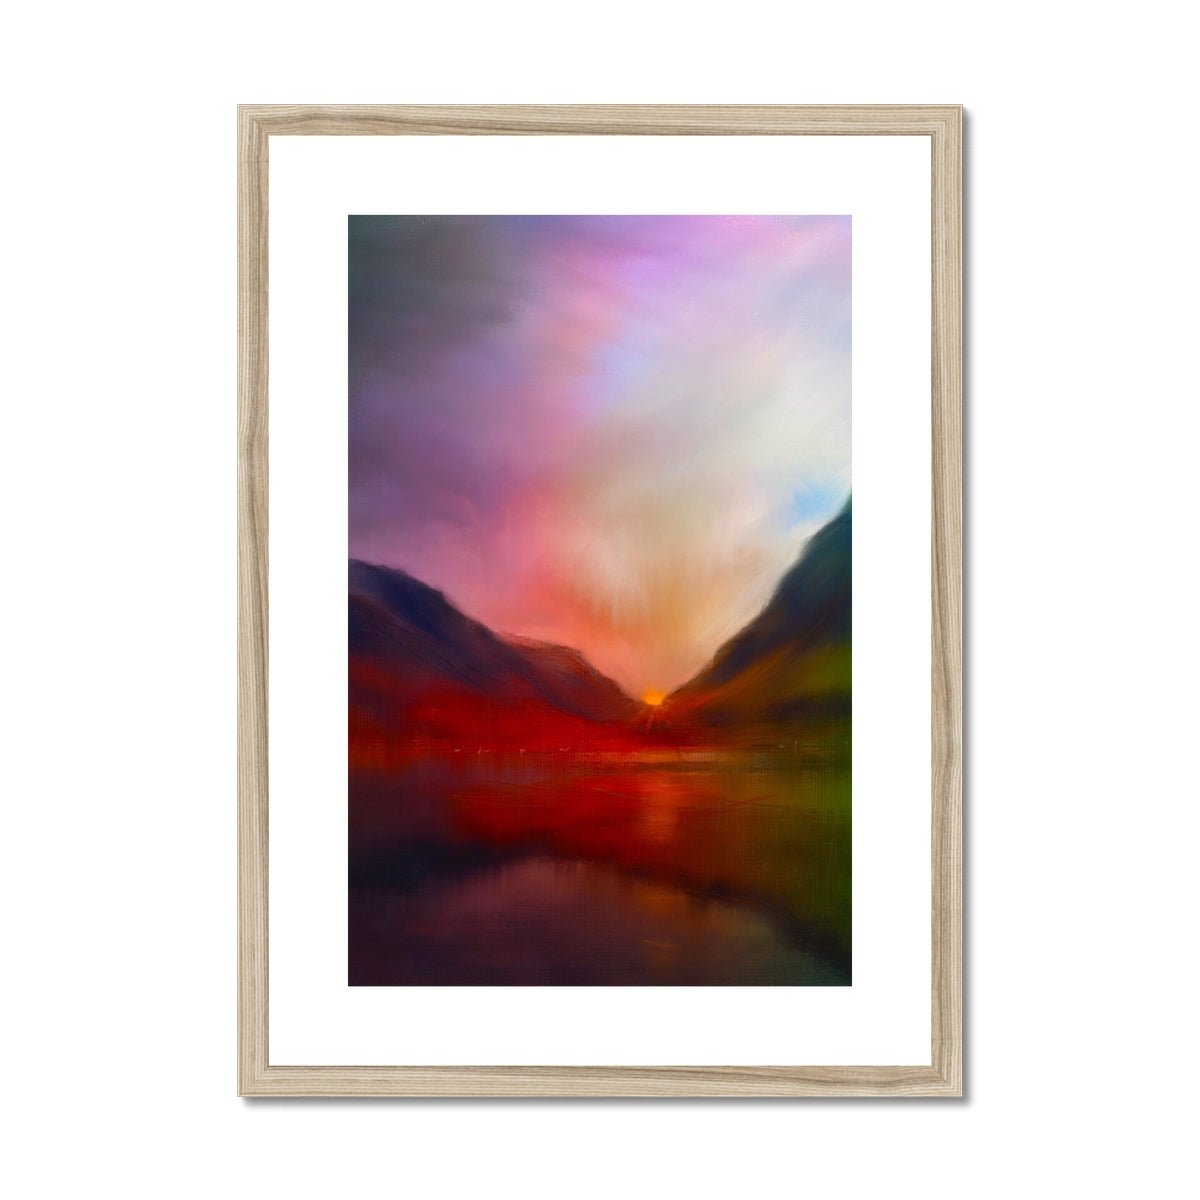 Glencoe Sunset Painting | Framed & Mounted Prints From Scotland-Framed & Mounted Prints-Glencoe Art Gallery-A2 Portrait-Natural Frame-Paintings, Prints, Homeware, Art Gifts From Scotland By Scottish Artist Kevin Hunter